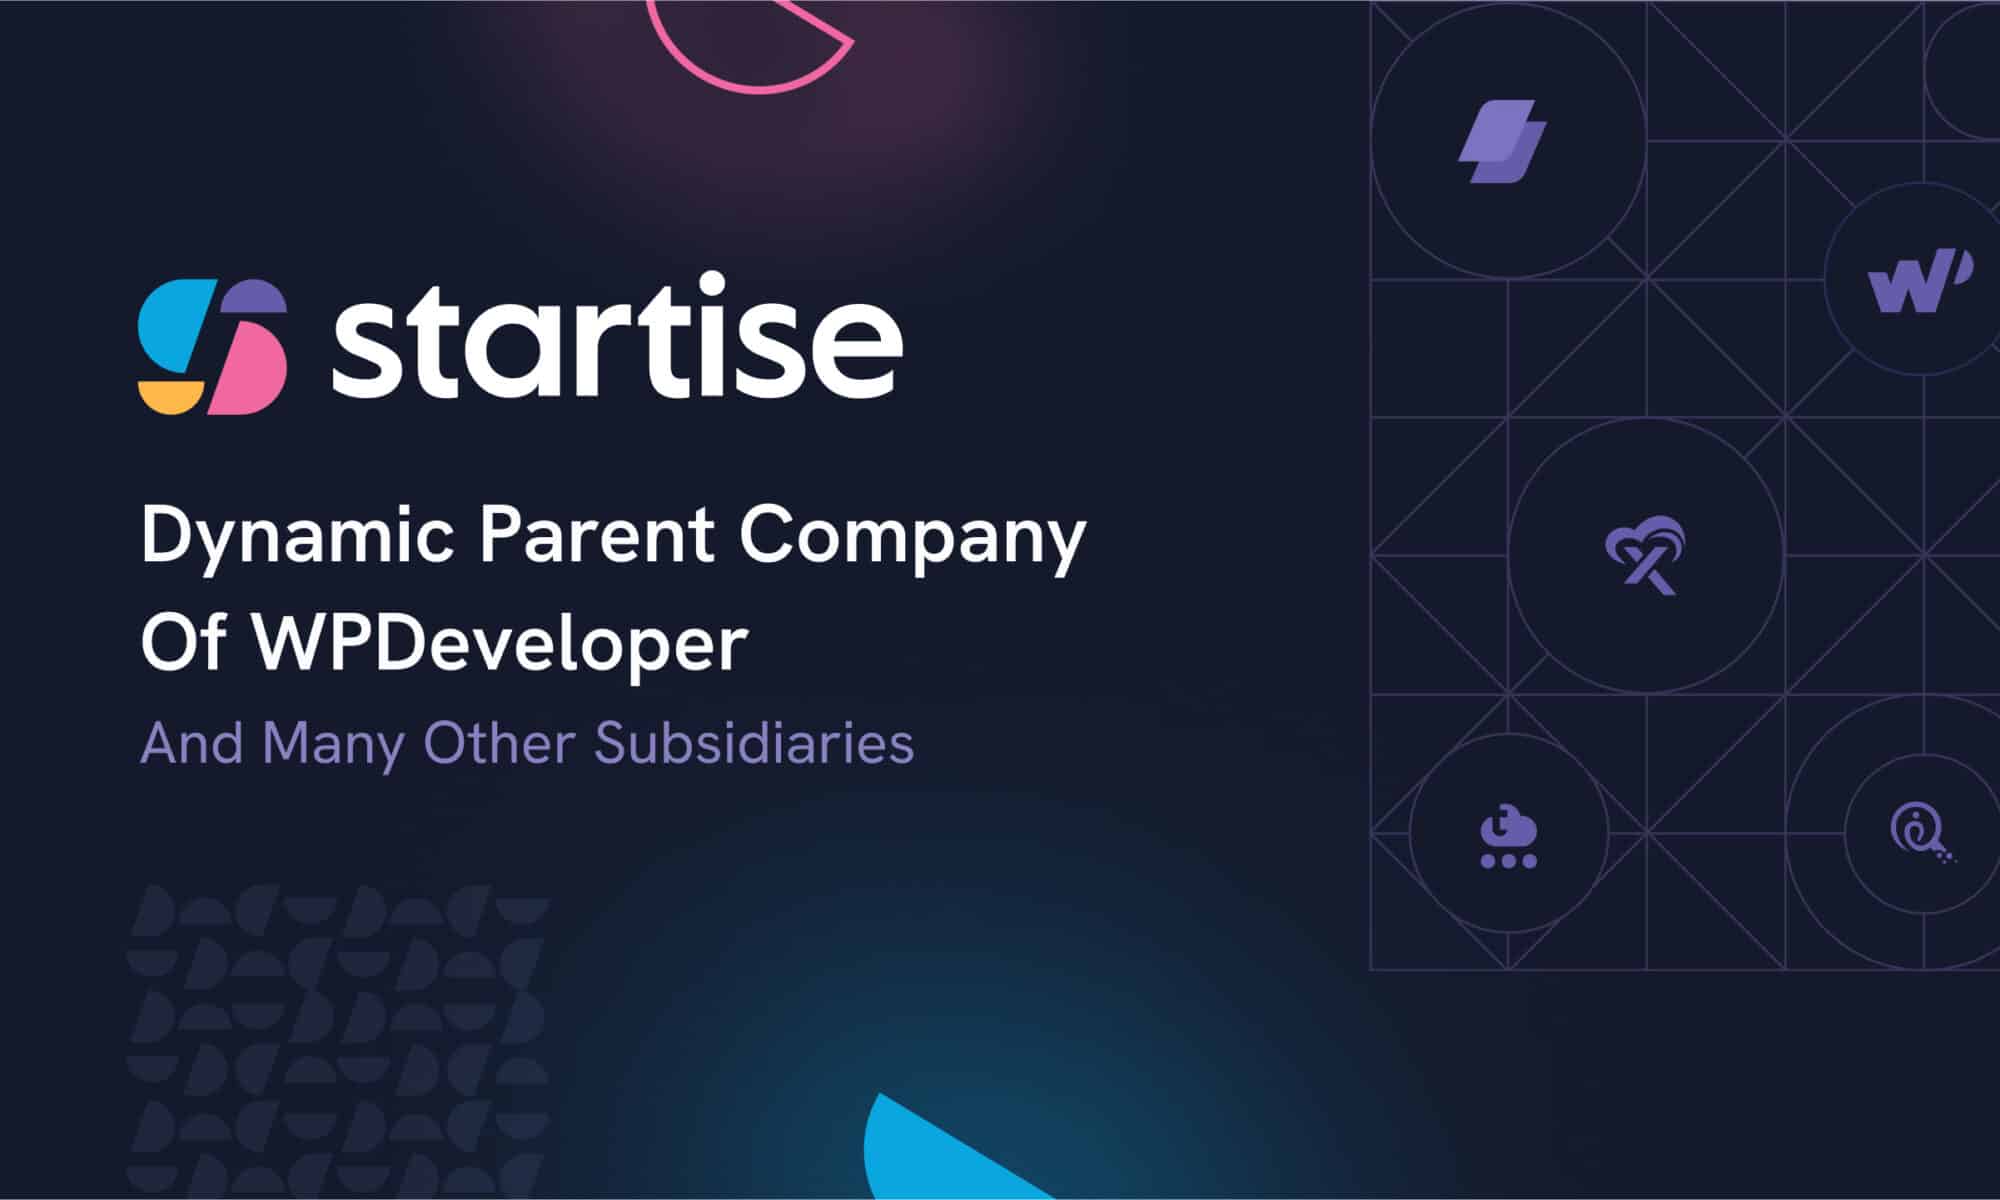 Startise - Dynamic Parent Company Of WPDeveloper And Many Other Subsidiaries